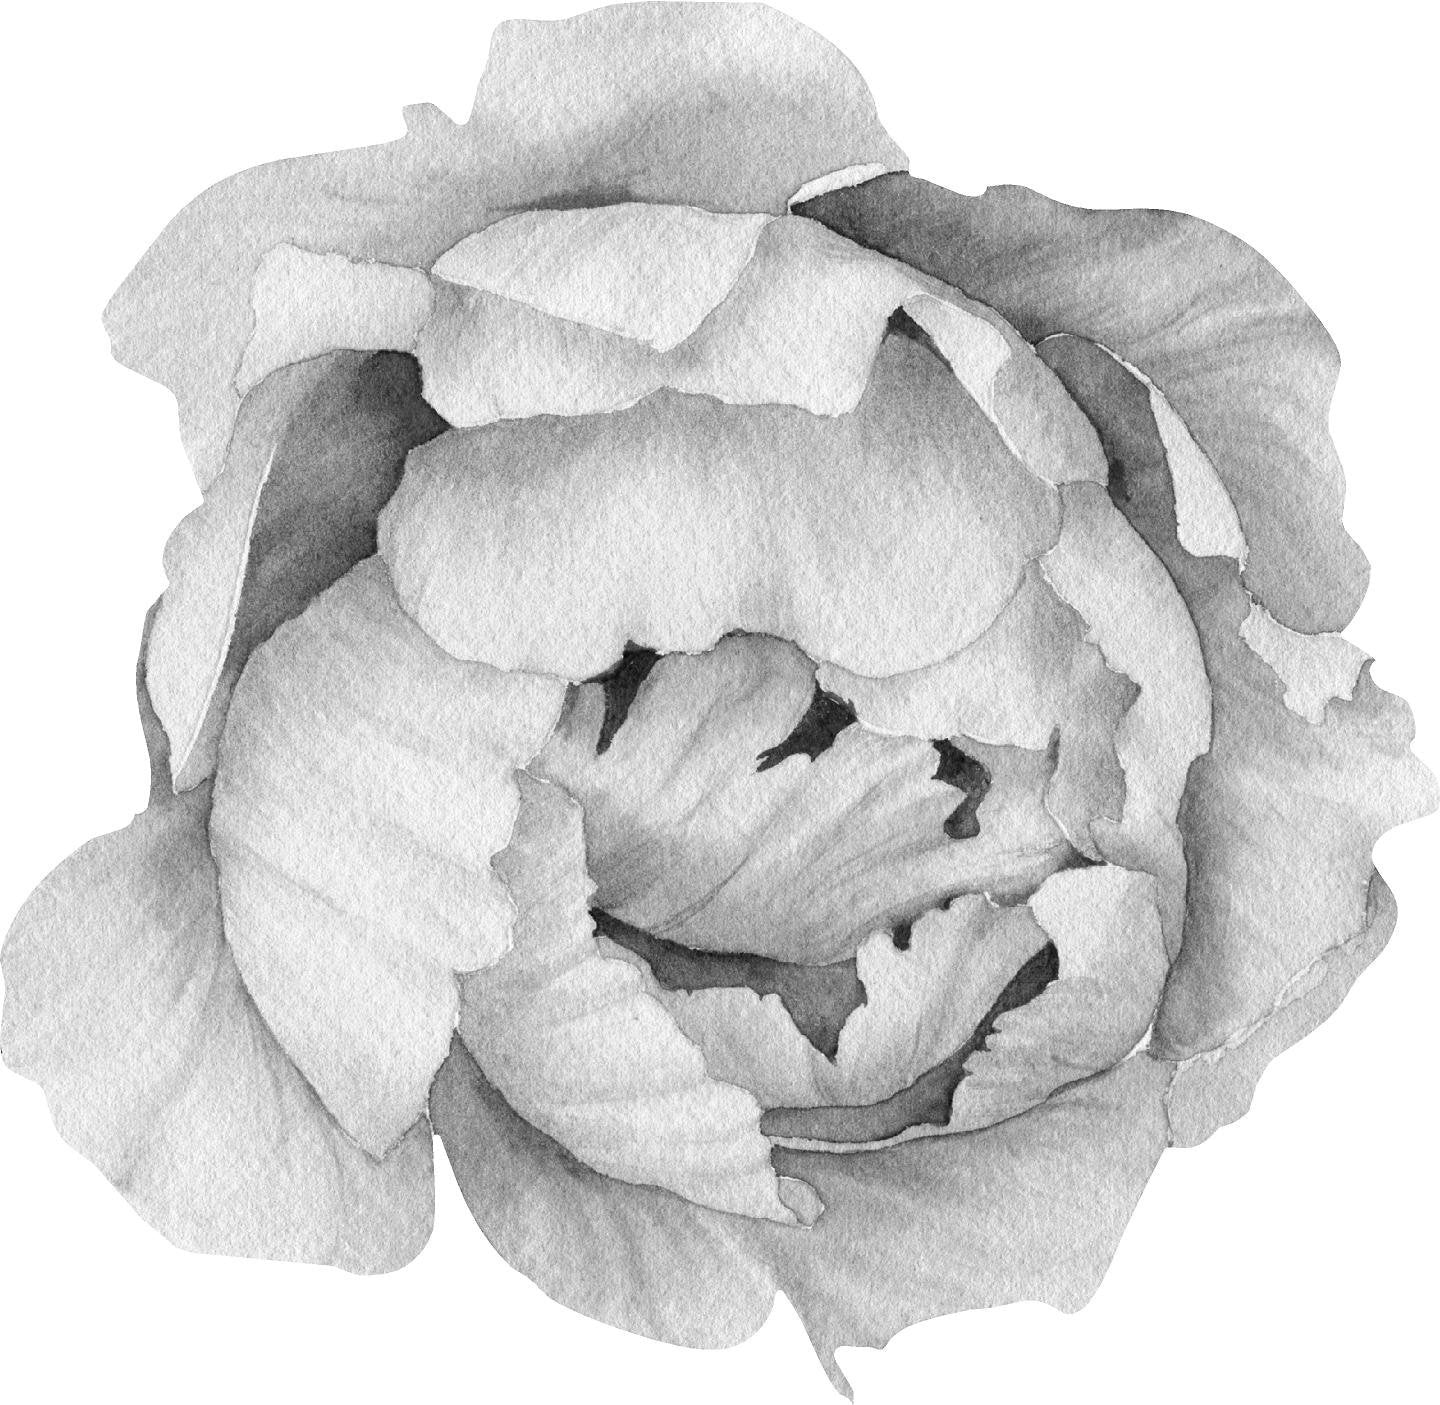 Black/White Peony #5 Wall Decal Removable Fabric Vinyl Flower Wall Sticker for Baby Girl Floral Nursery Room Decor